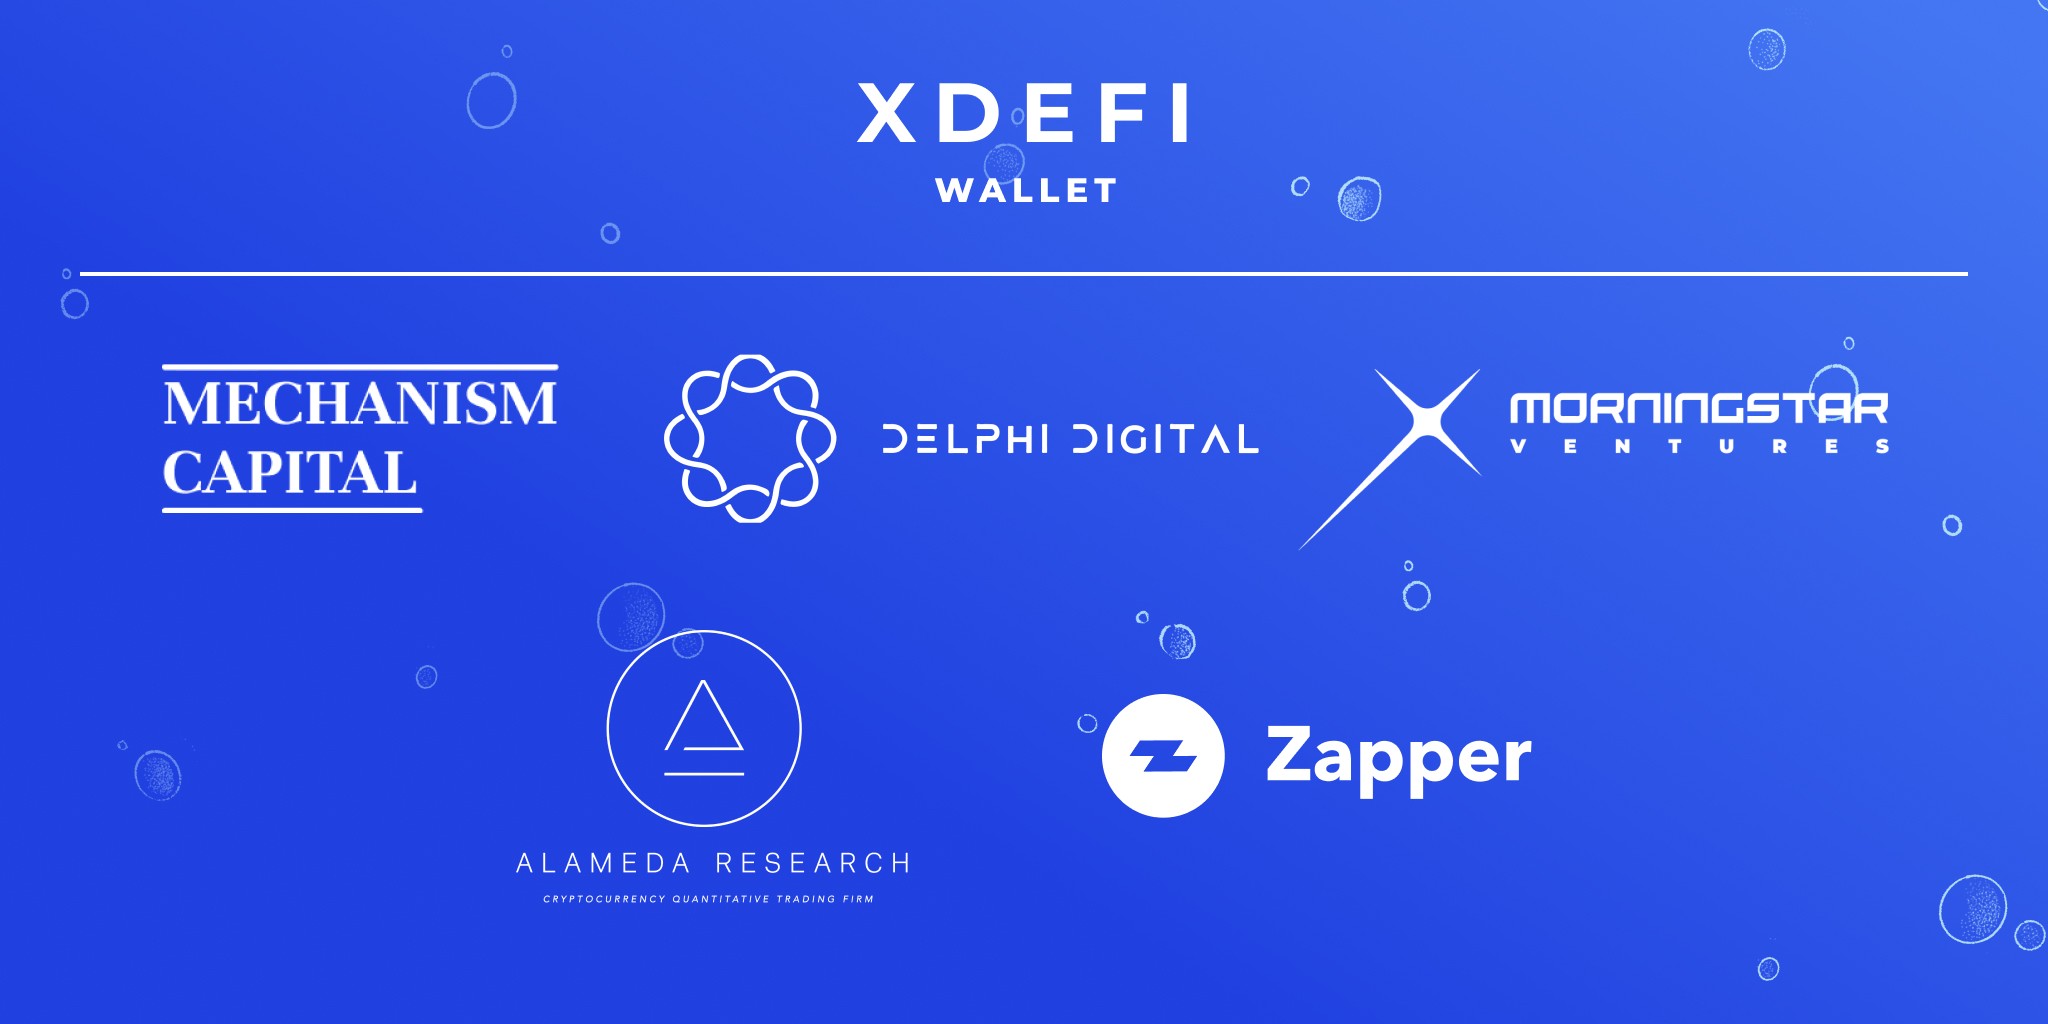 XDEFI Wallet - Seed Investors Announcement